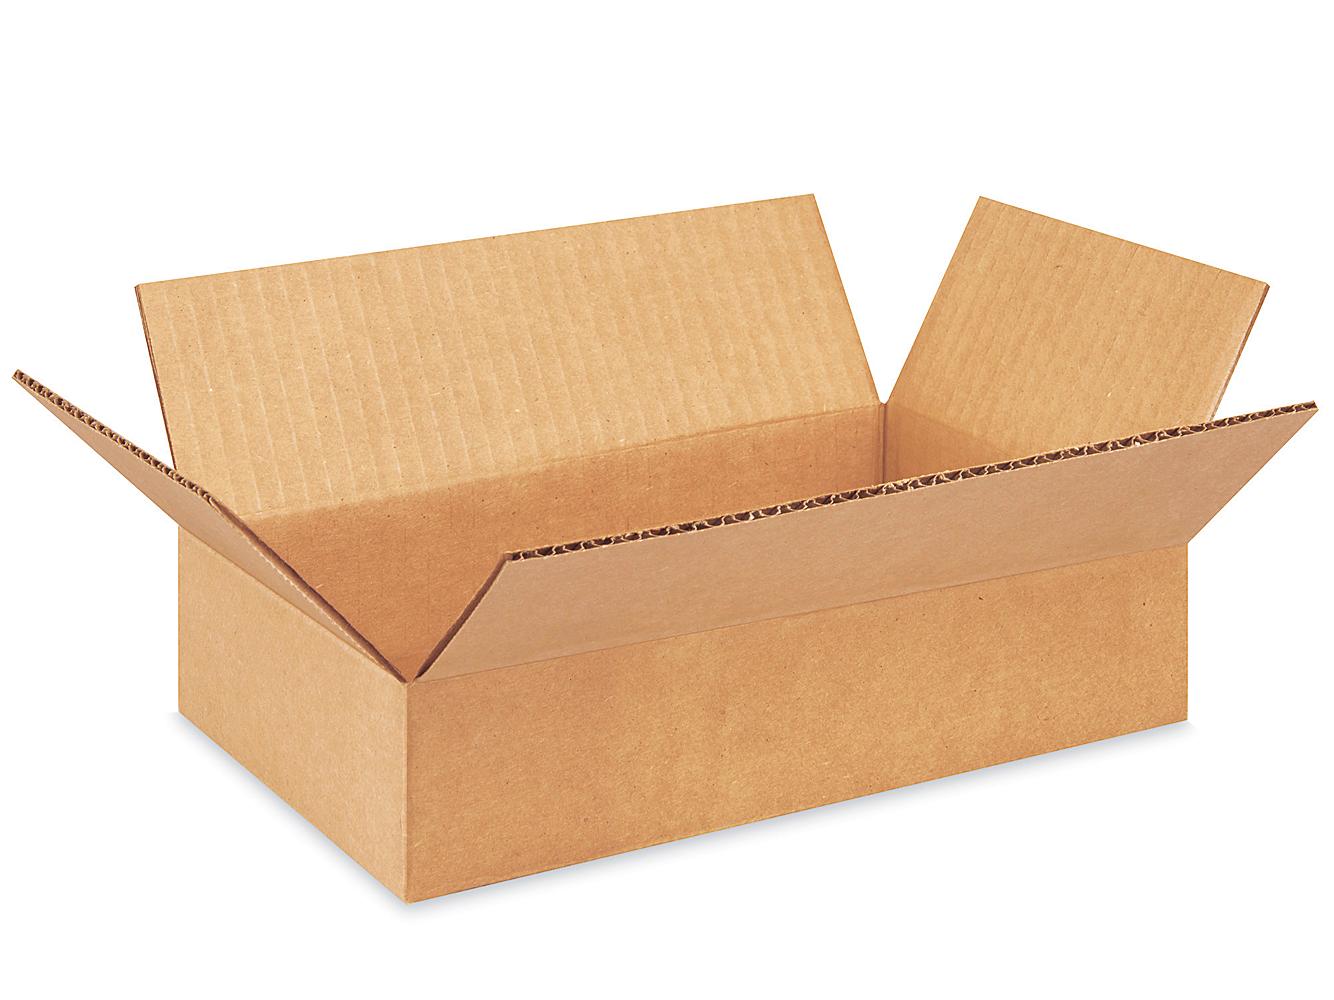 Fast Shipping 25-6 x 6 x 2" Corrugated Boxes